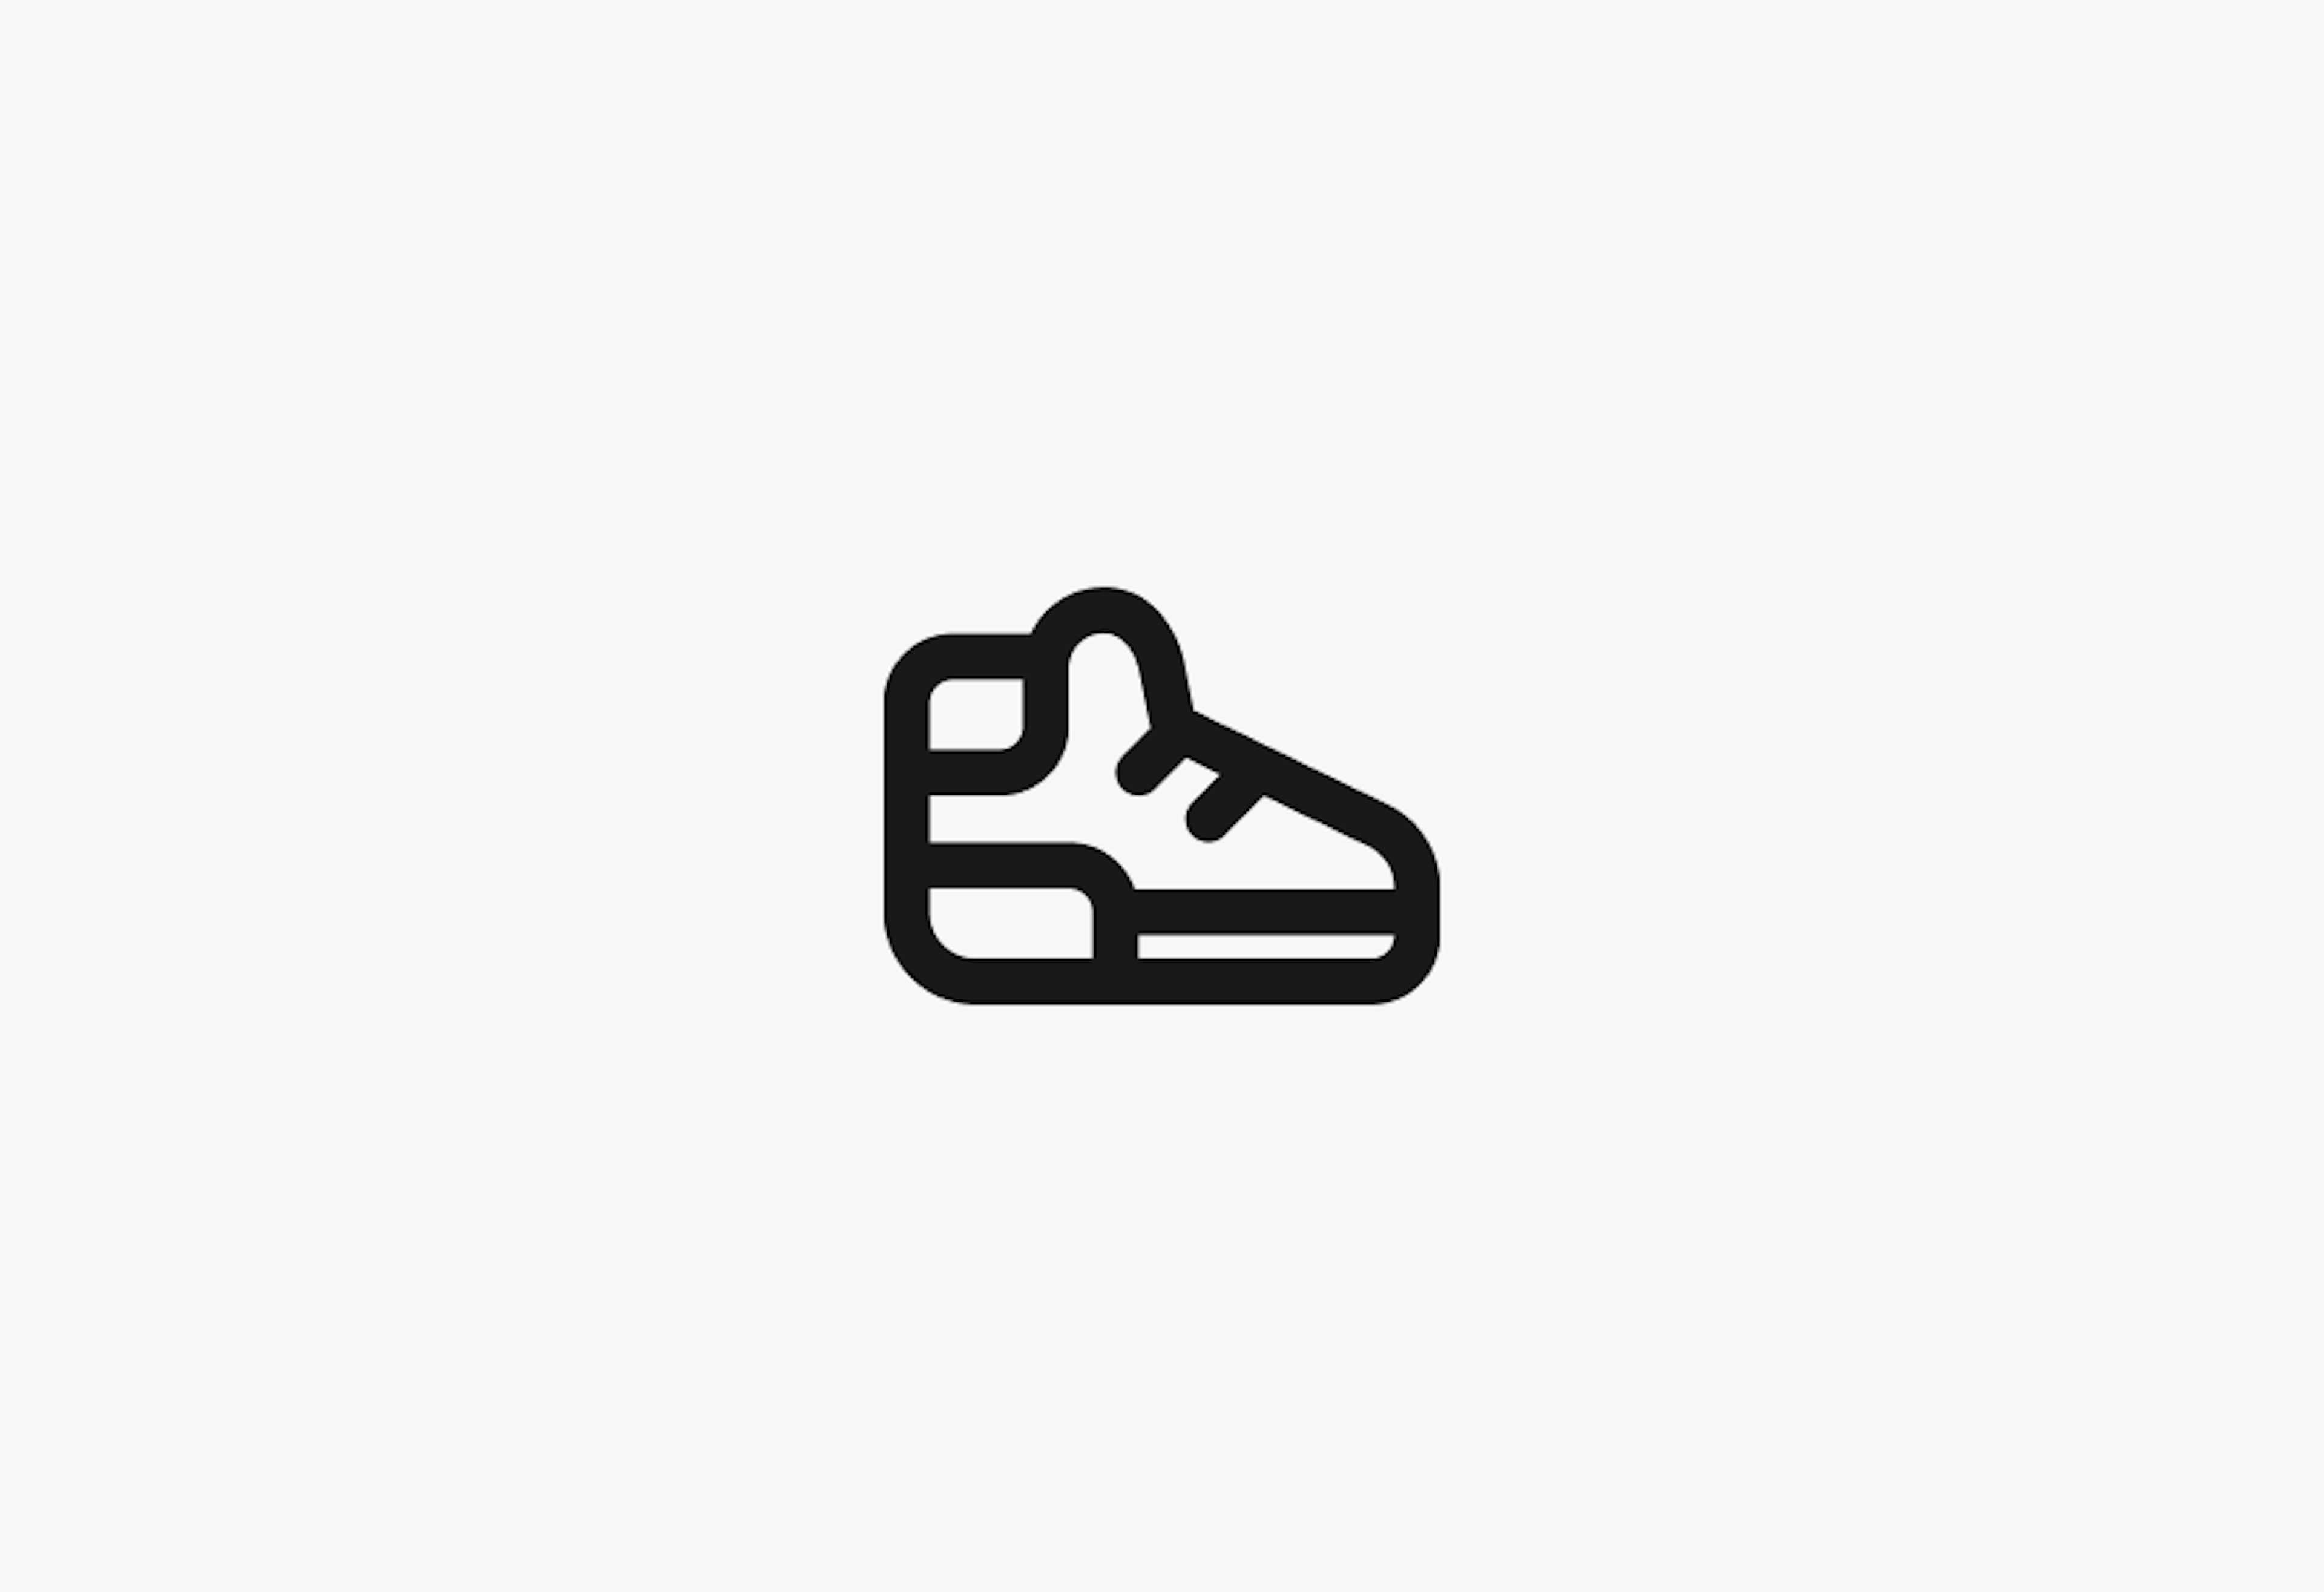 A shoe icon in our linear 2px visual style.